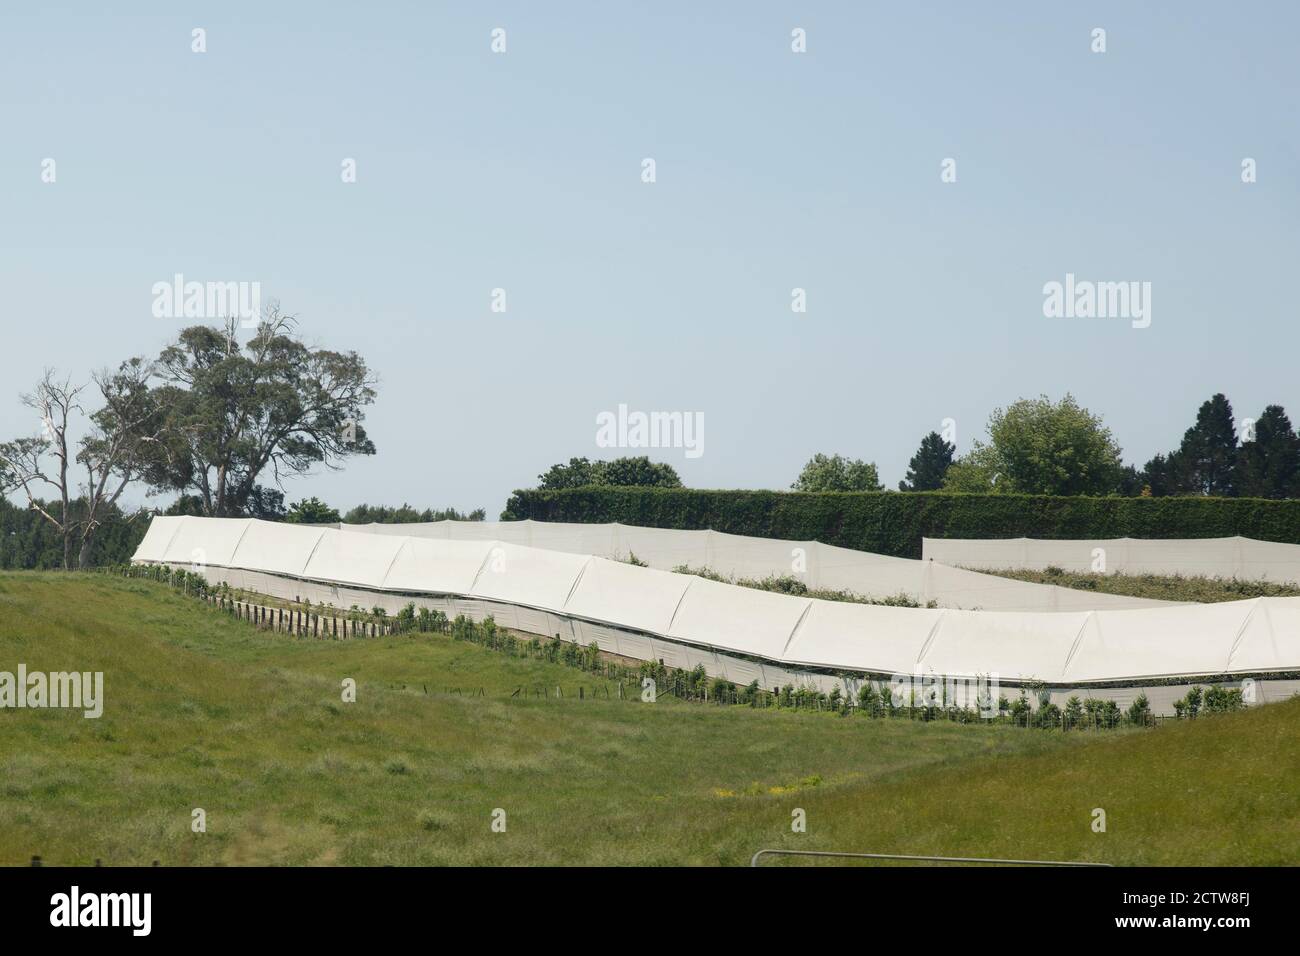 New Zealand greenhouse farming and agriculture industry in North Island countryside. Stock Photo